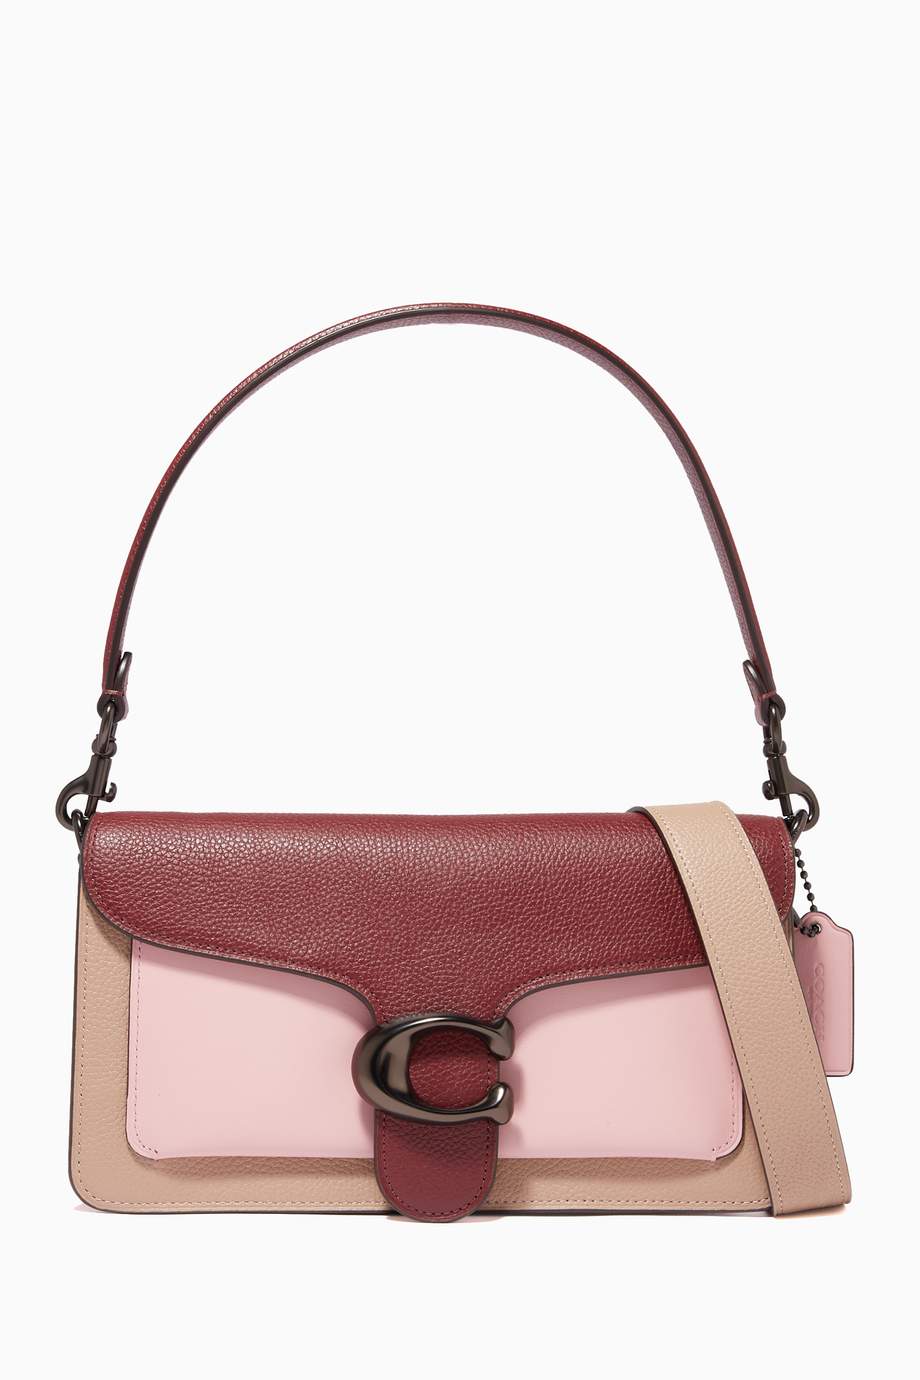 Shop Coach Pink Tabby 26 Shoulder Bag in Colourblock Leather for Women ...